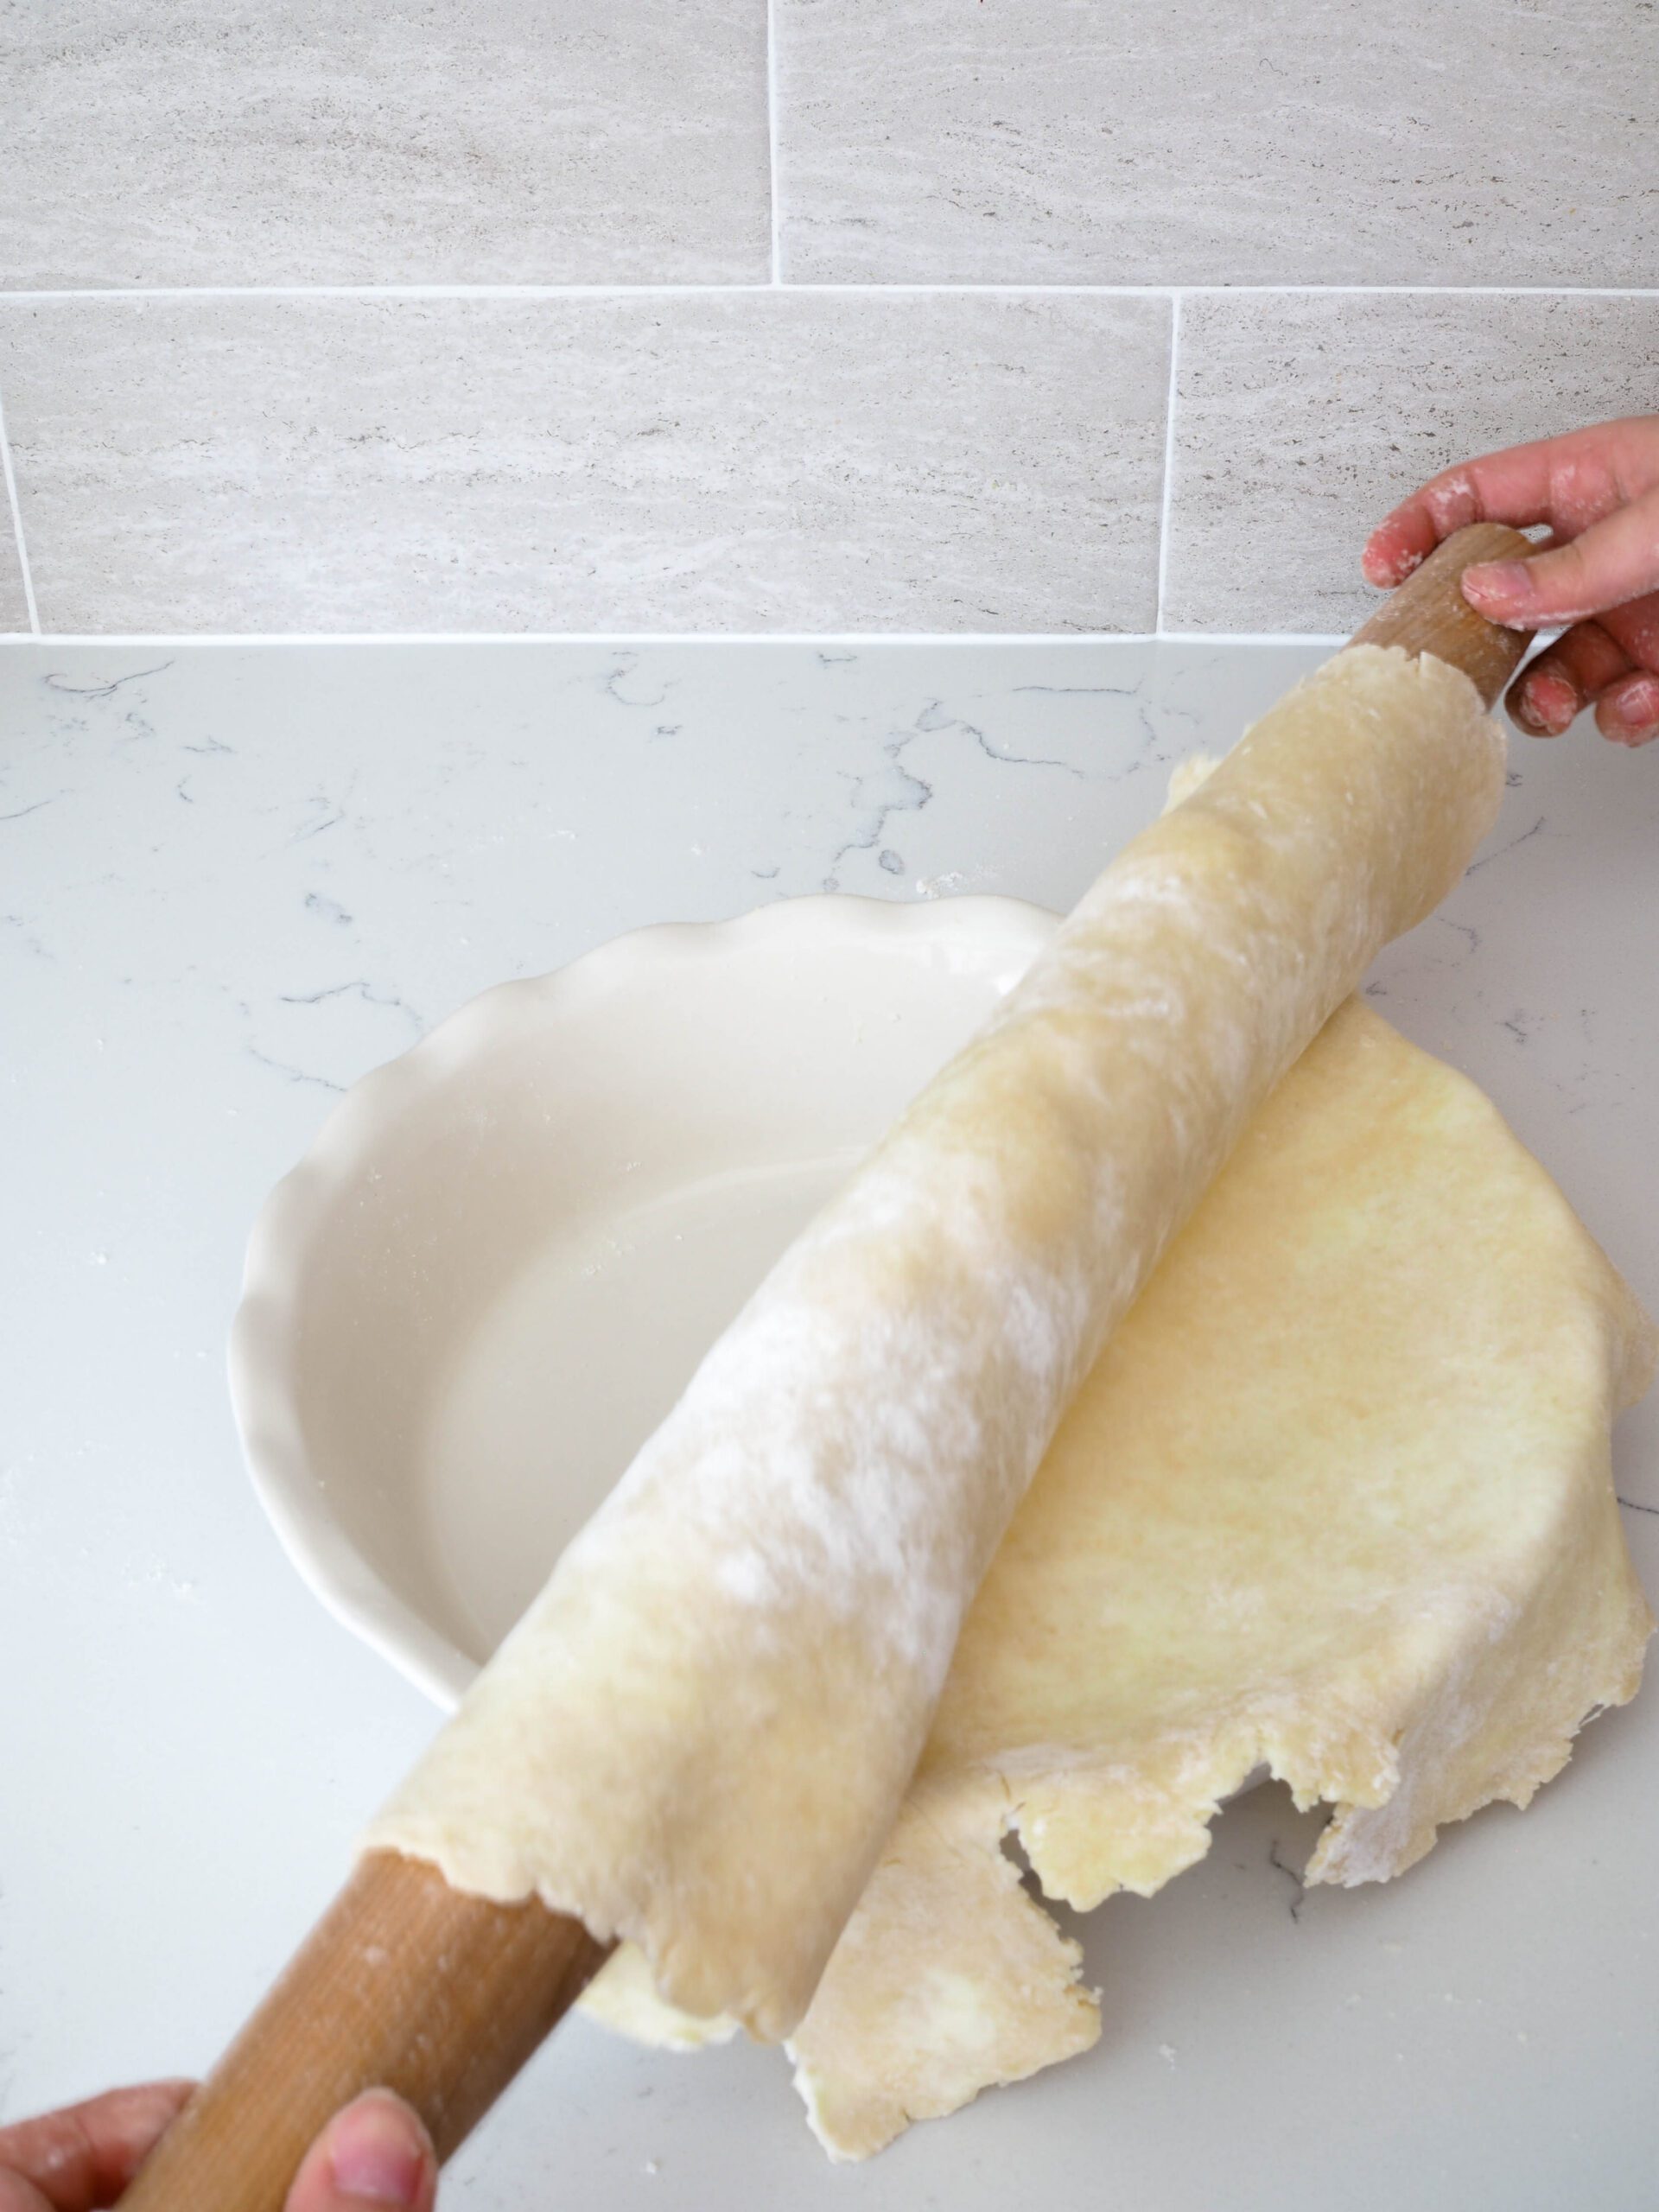 A pie crust is being unrolled off of a rolling pin and into a pie pan.